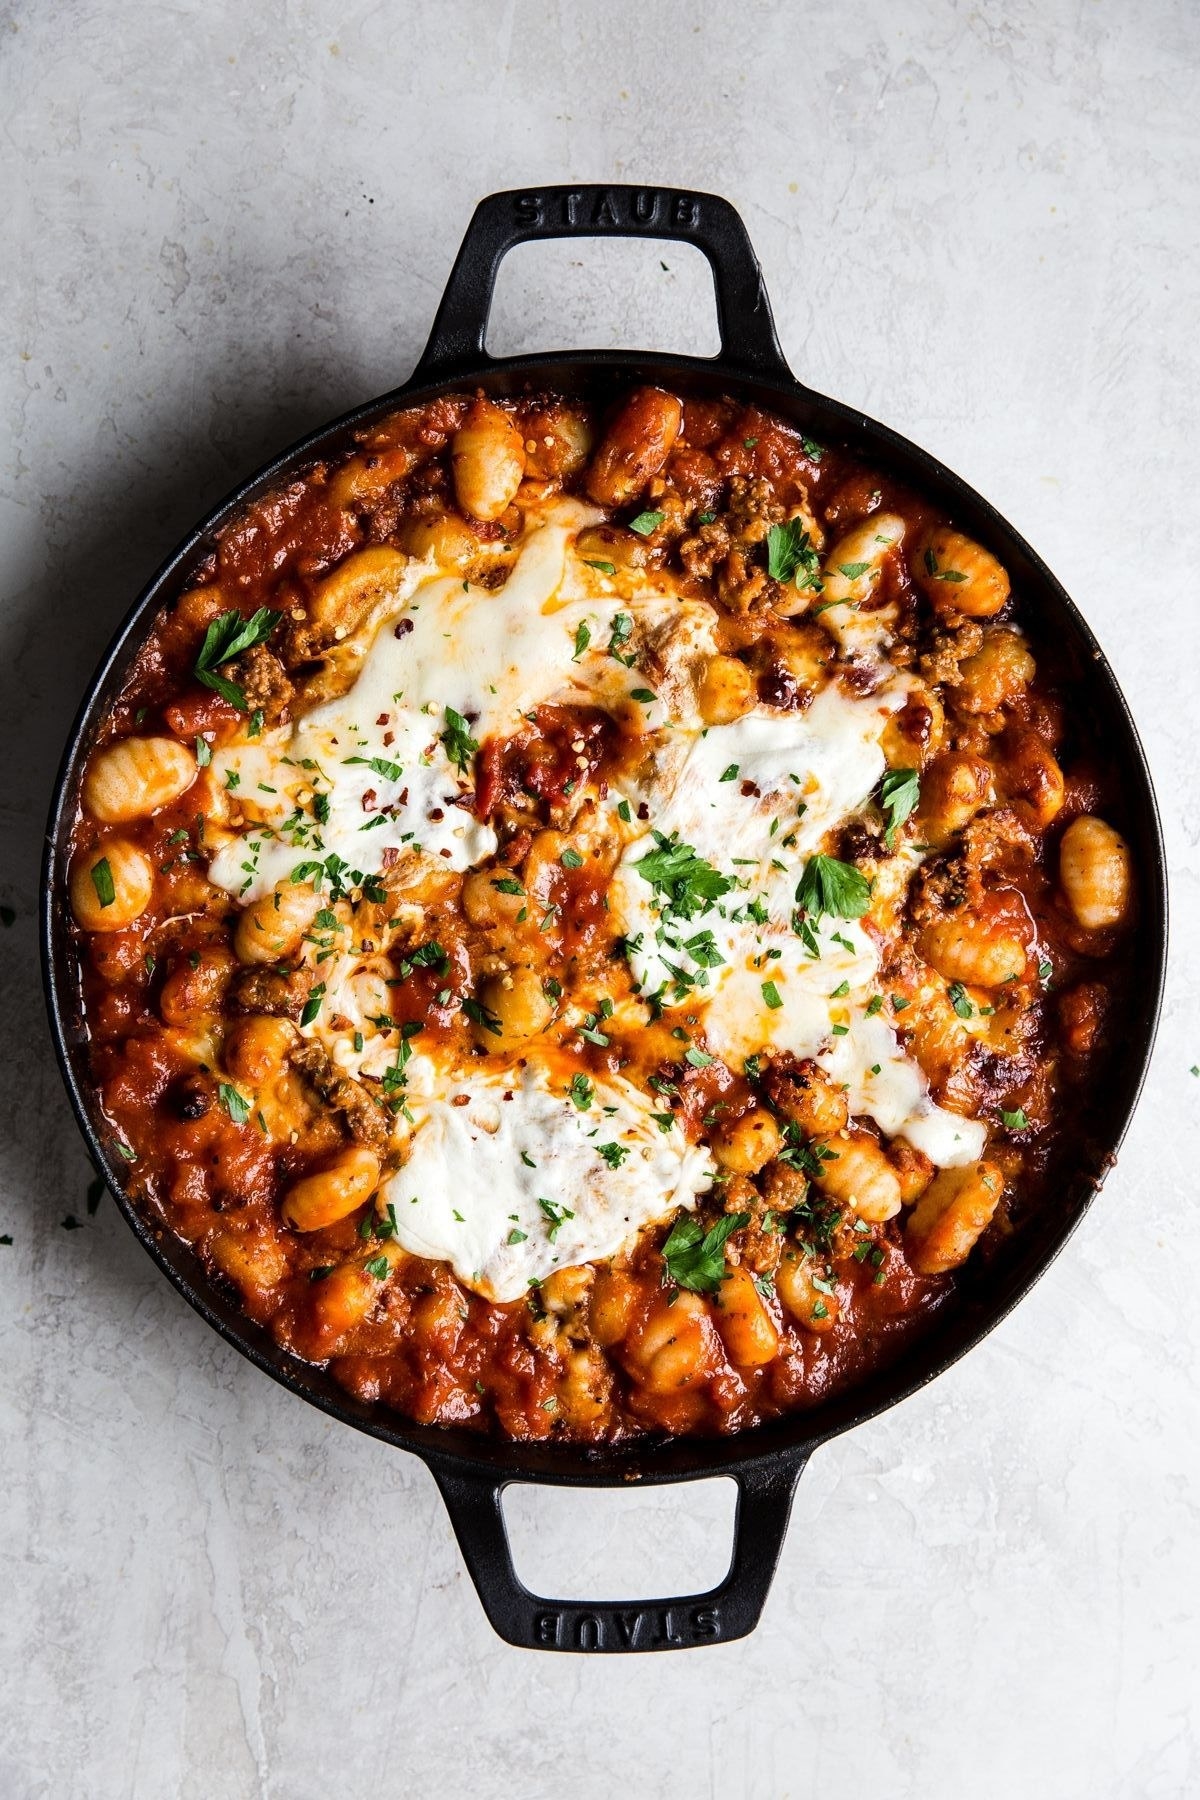 A skillet of cheesy baked gnocchi.